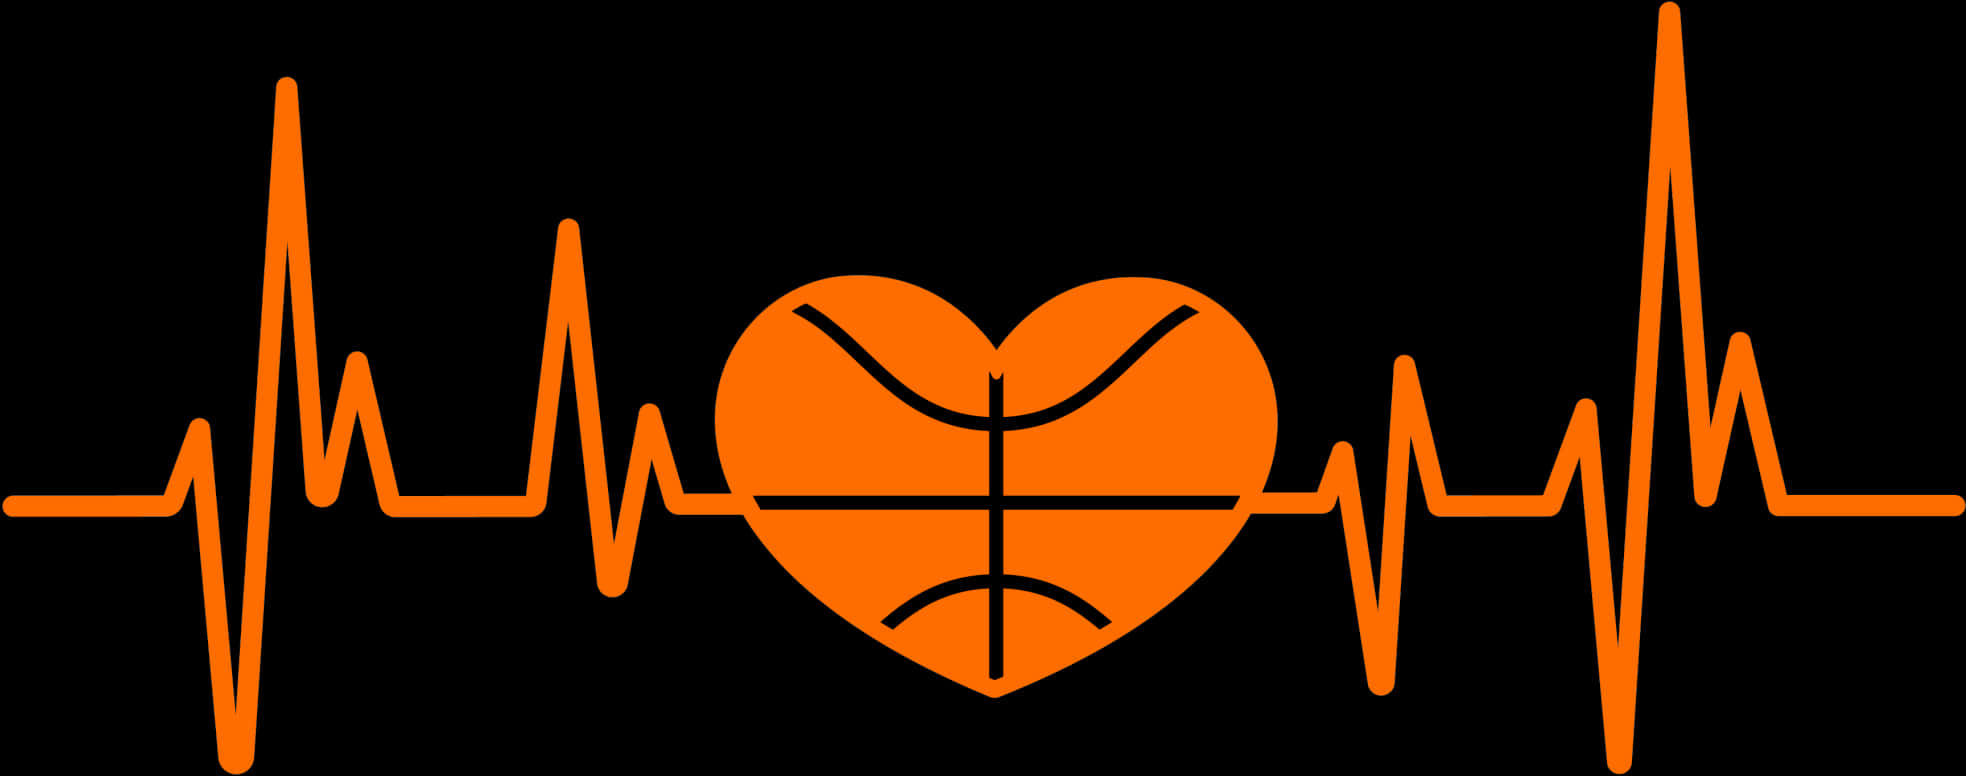 A Heart With A Basketball Ball In The Middle